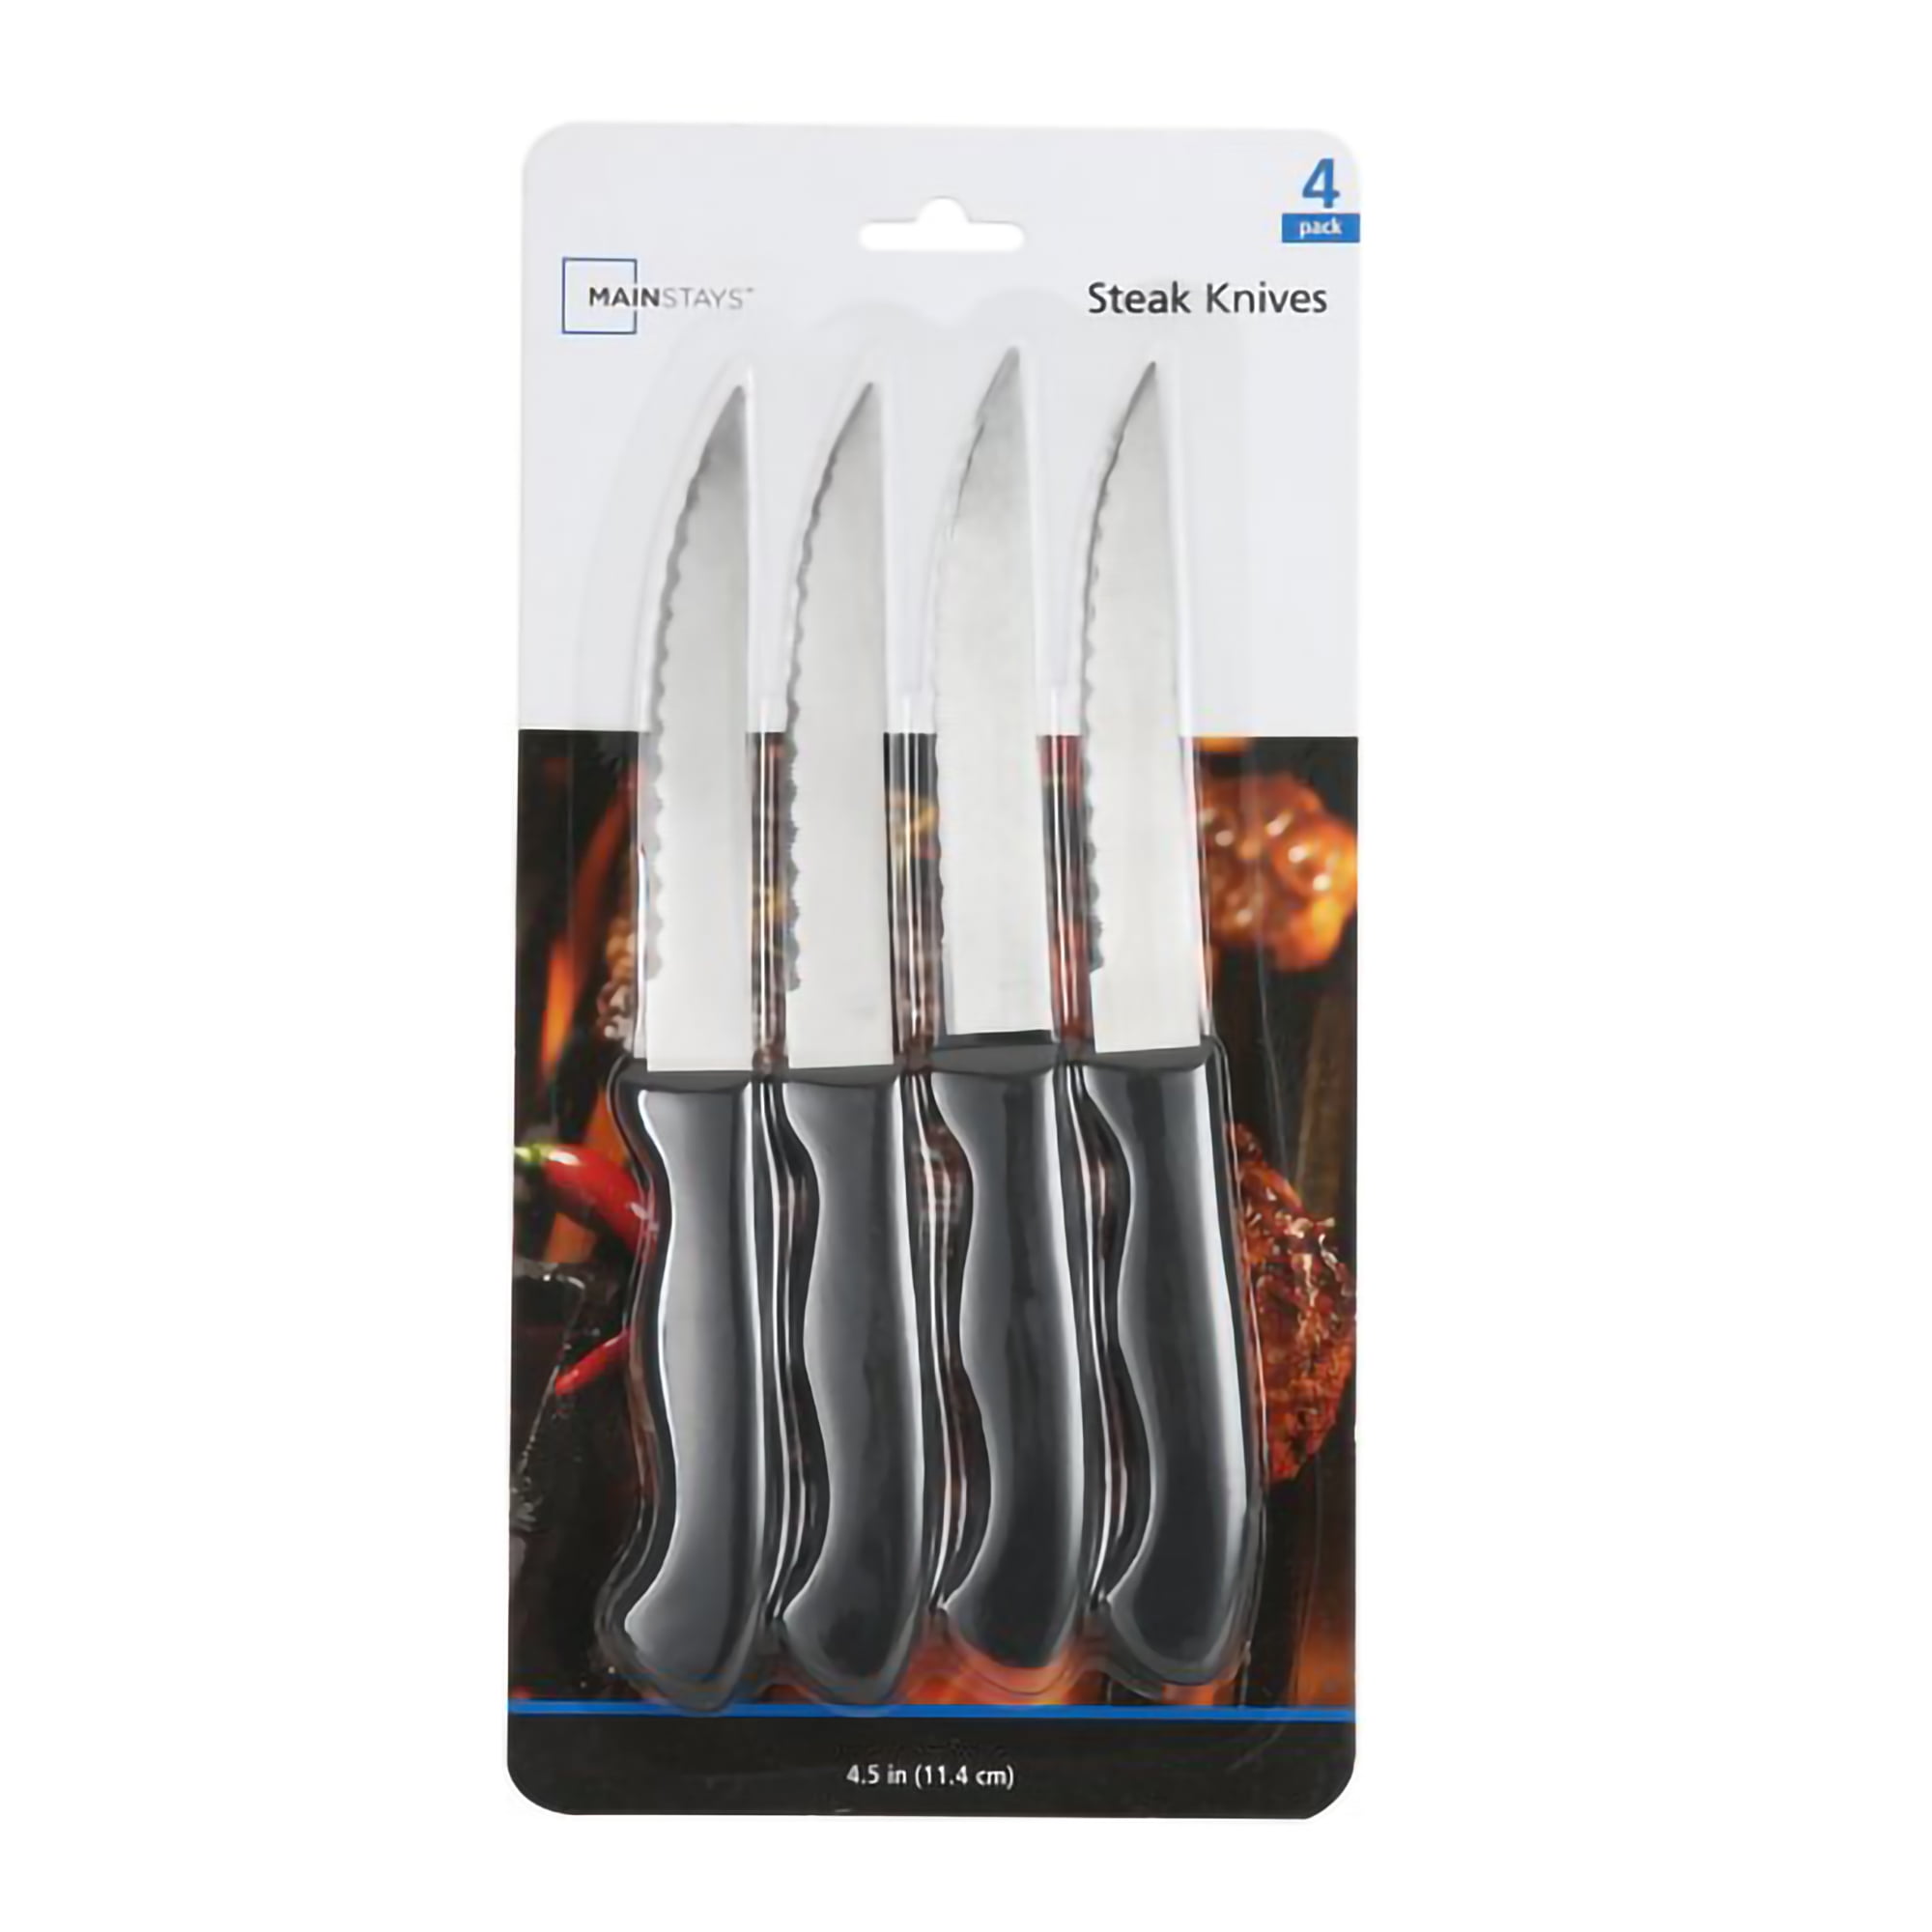 Mainstays Stainless Steel 3 Piece Color Knife Set with Soft Grip Handles, Multicolor